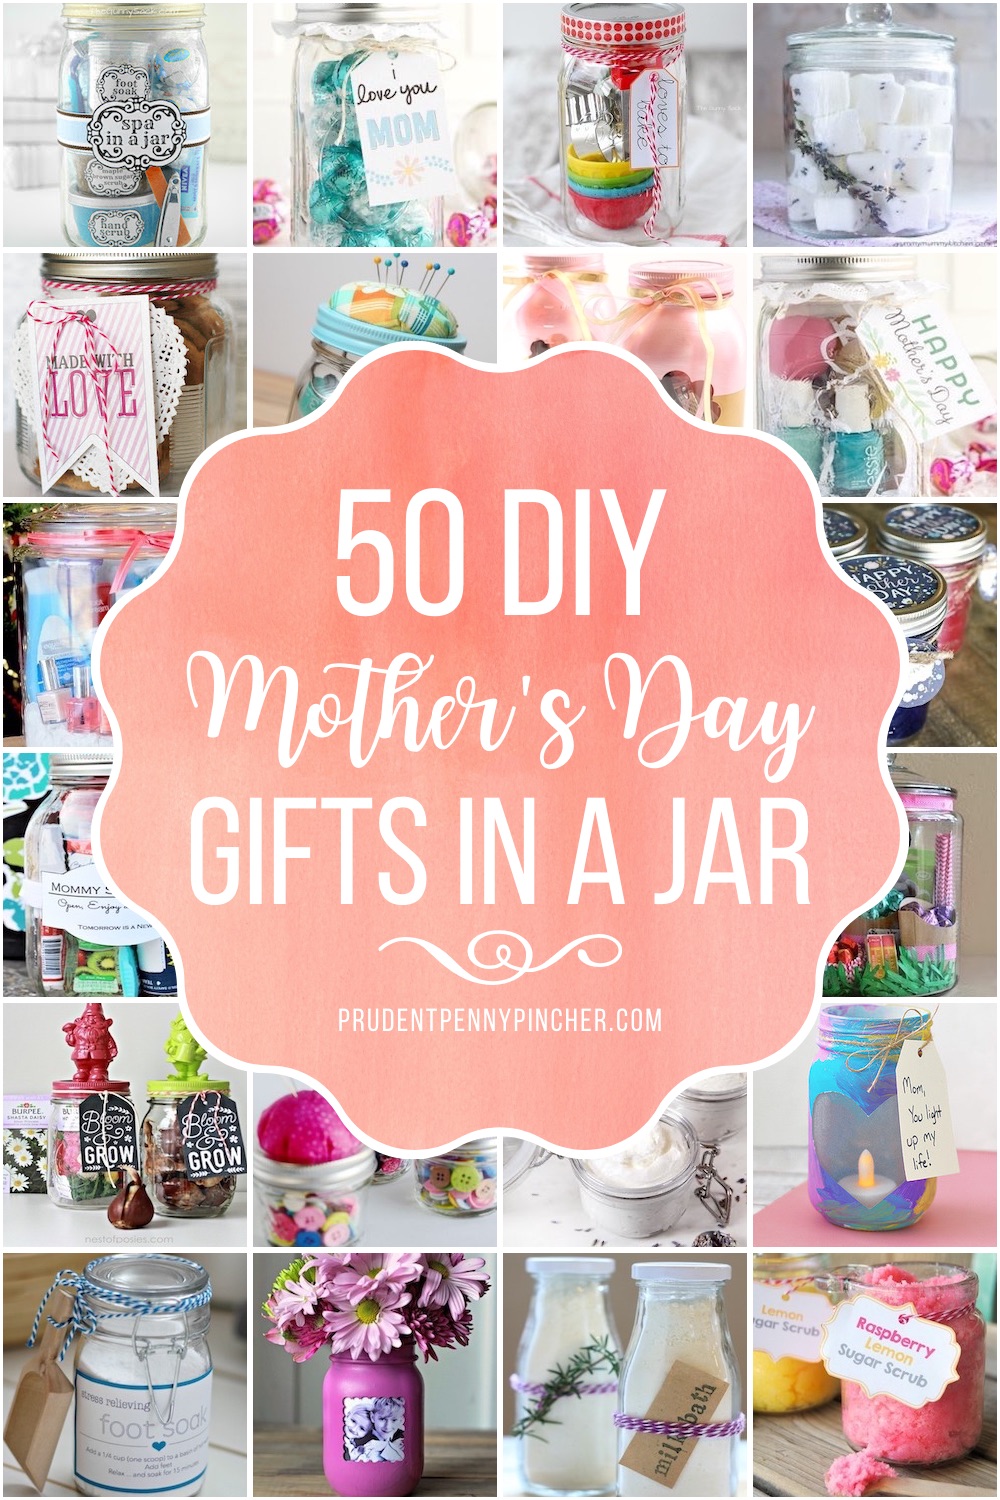 https://www.prudentpennypincher.com/wp-content/uploads/2020/04/mothers-day-gifts-in-a-jar.jpg